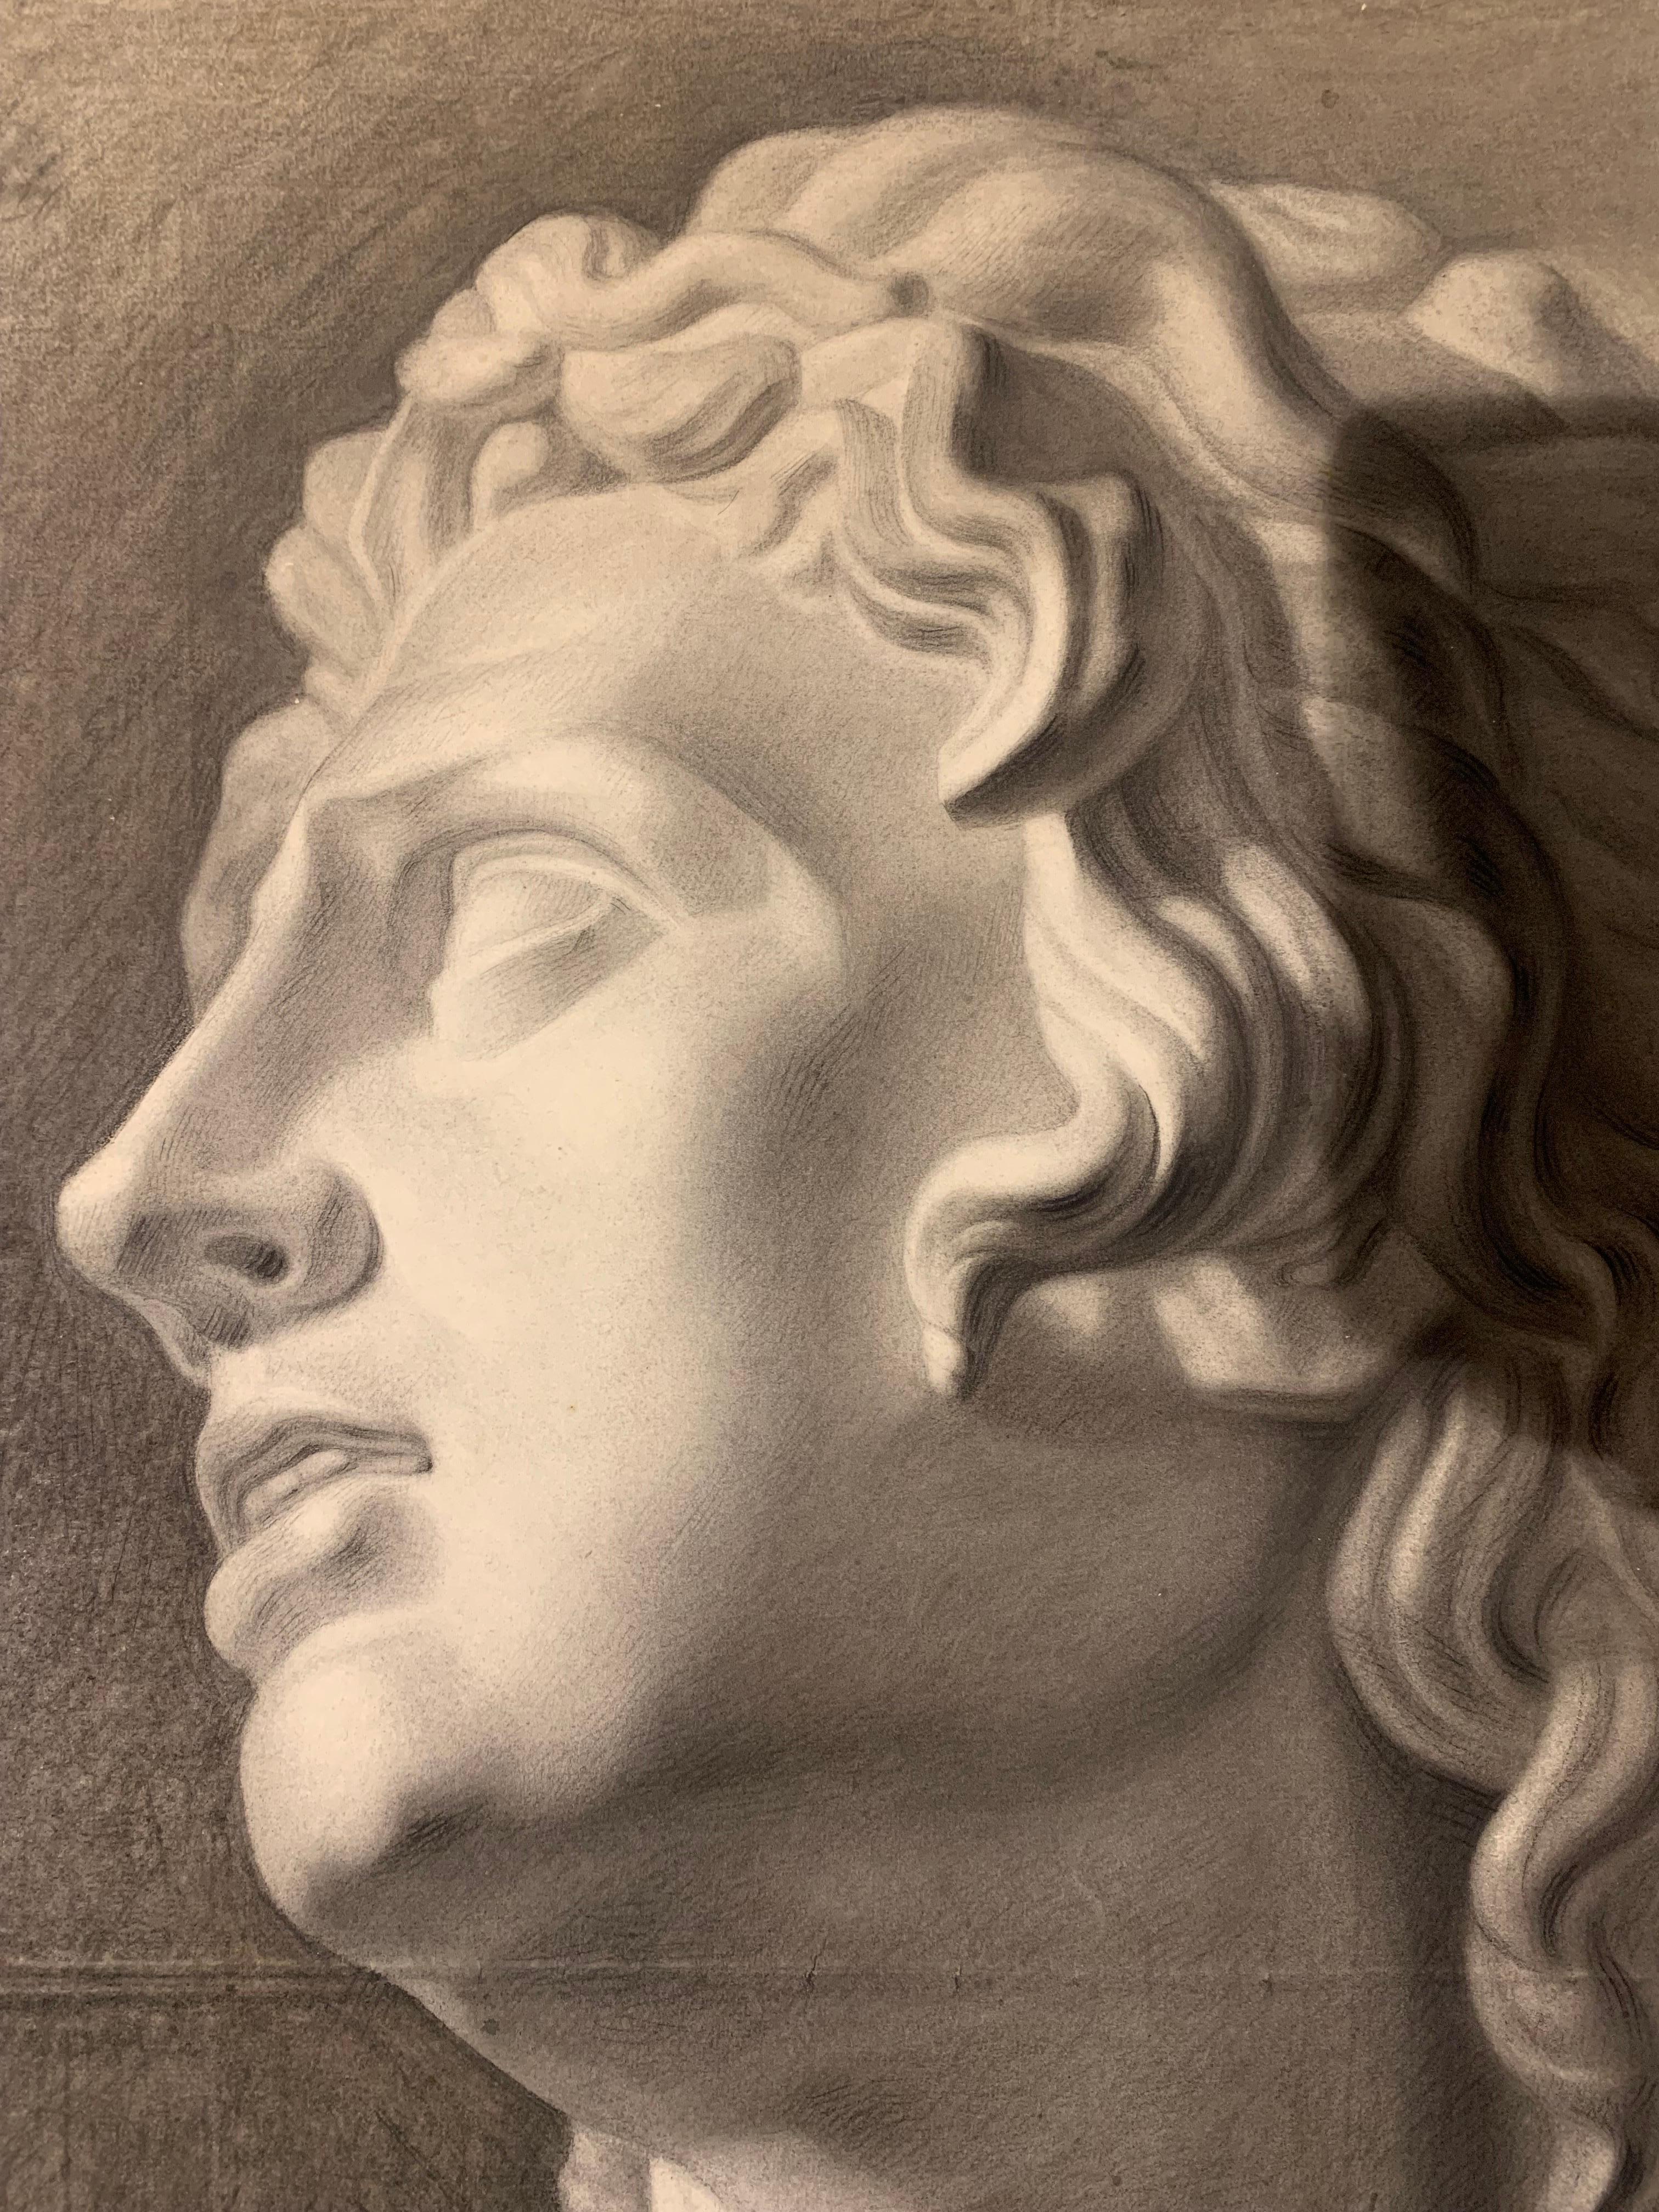 Large XIXth cent. Academic drawing of Alexander The Great’s bust from Uffizi.  10